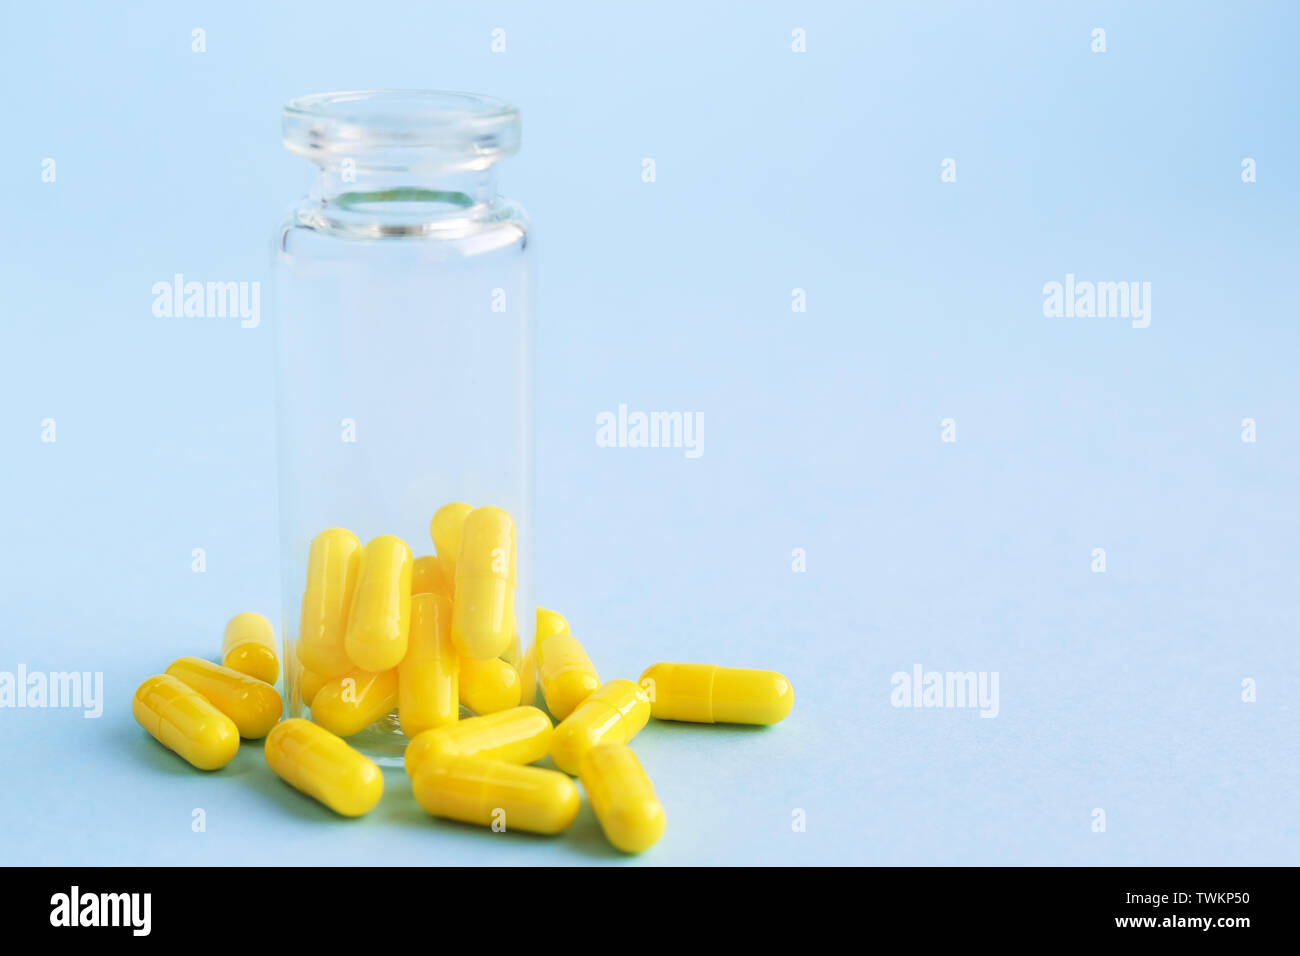 Download Yellow Capsules From Glass Bottle On Blue Background Copyspace For Text Epidemic Painkillers Healthcare Treatment Pills And Drug Abuse Concept Stock Photo Alamy PSD Mockup Templates